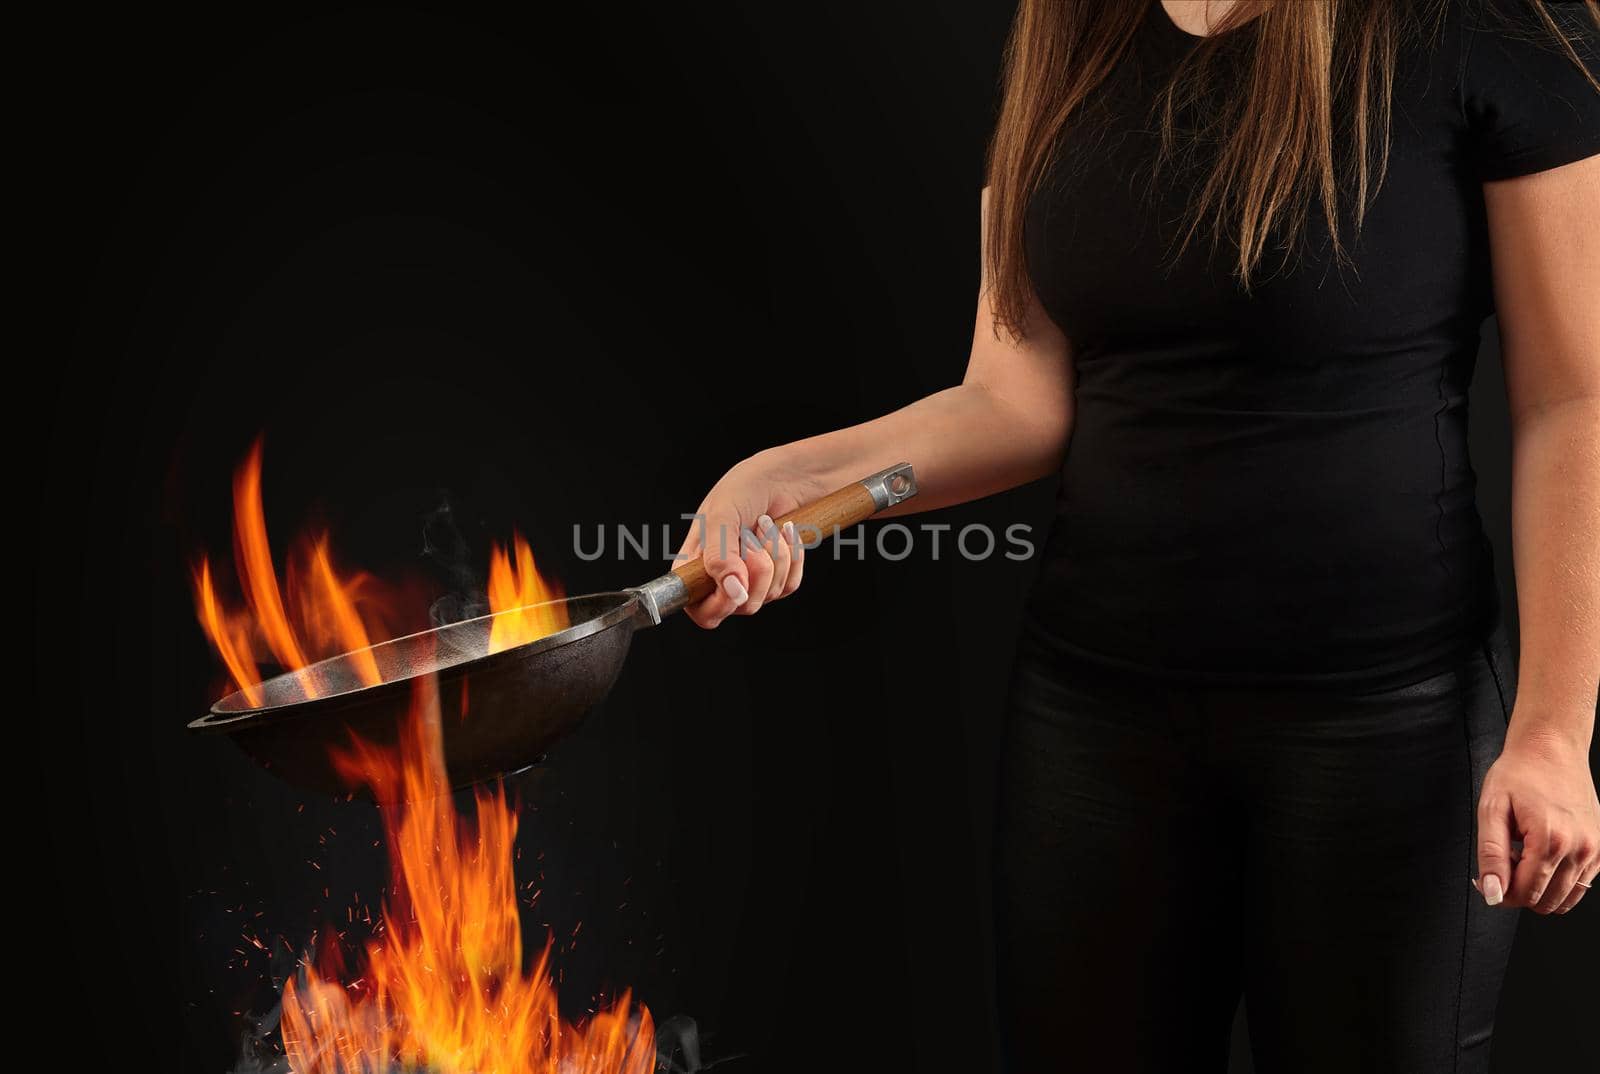 Brunette lady with tattooed hands and long hair, dressed in leggings and t-shirt. Holding a wok pan above fire against black studio background. Cooking concept. Close up, copy space, side view